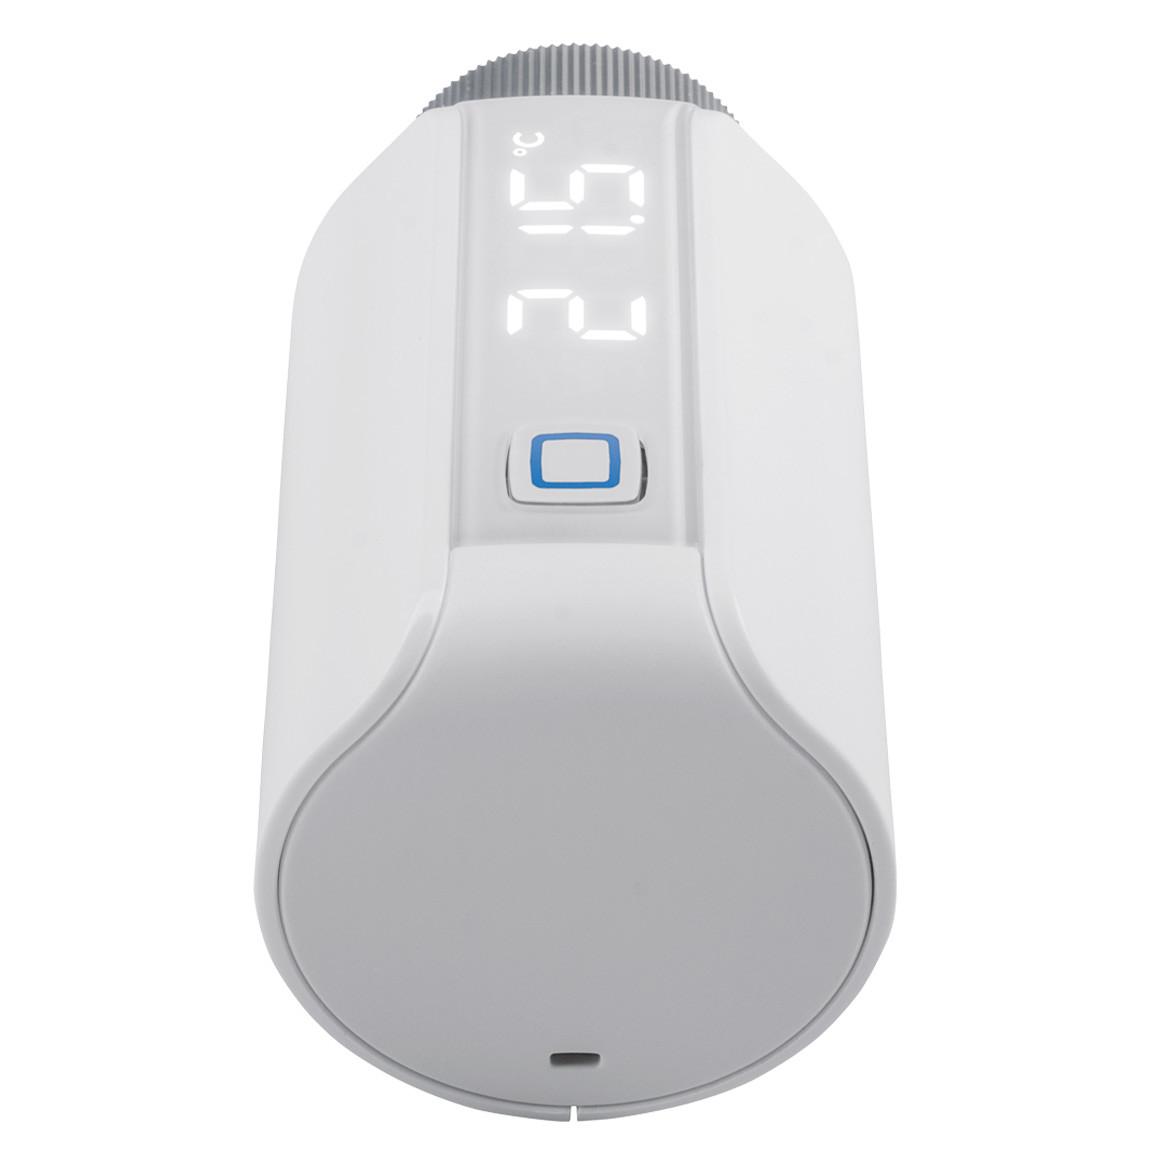 Homematic IP Access Point + Heizkörperthermostat Evo 2er-Set_Heizkoerperthermostat Evo angewinkelt